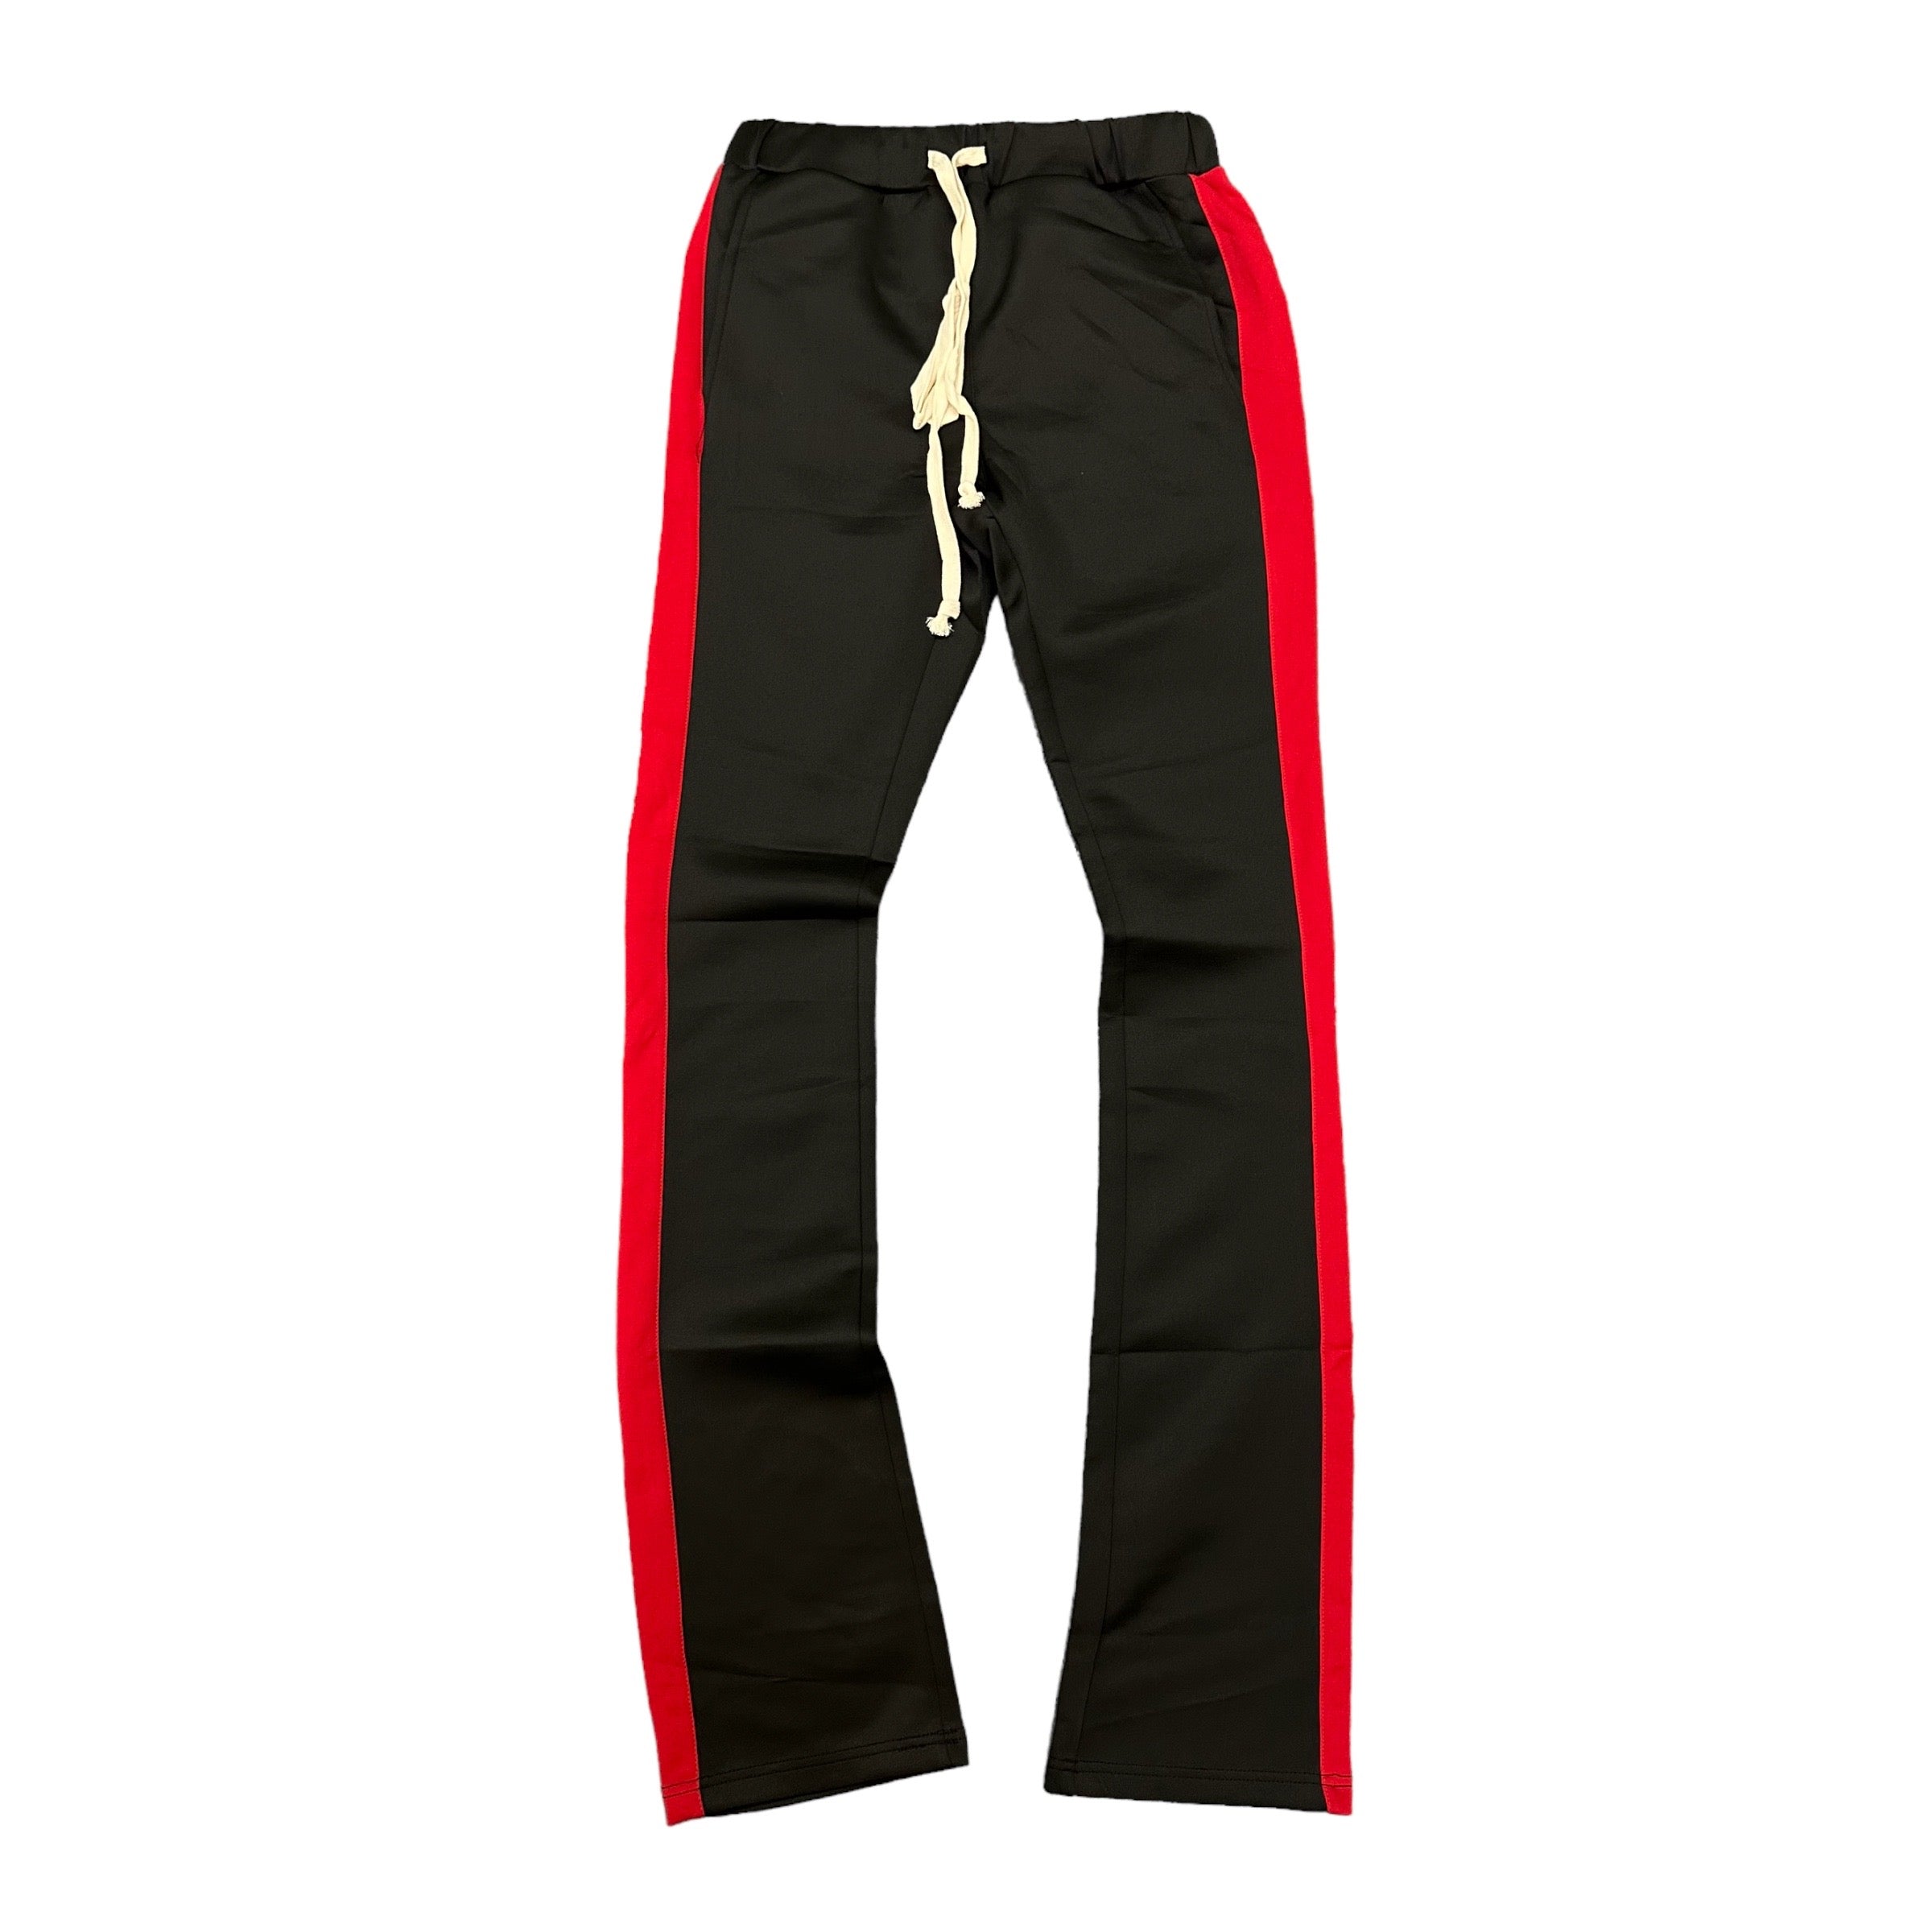 Ckel Stacked Track Pants Black Red 555